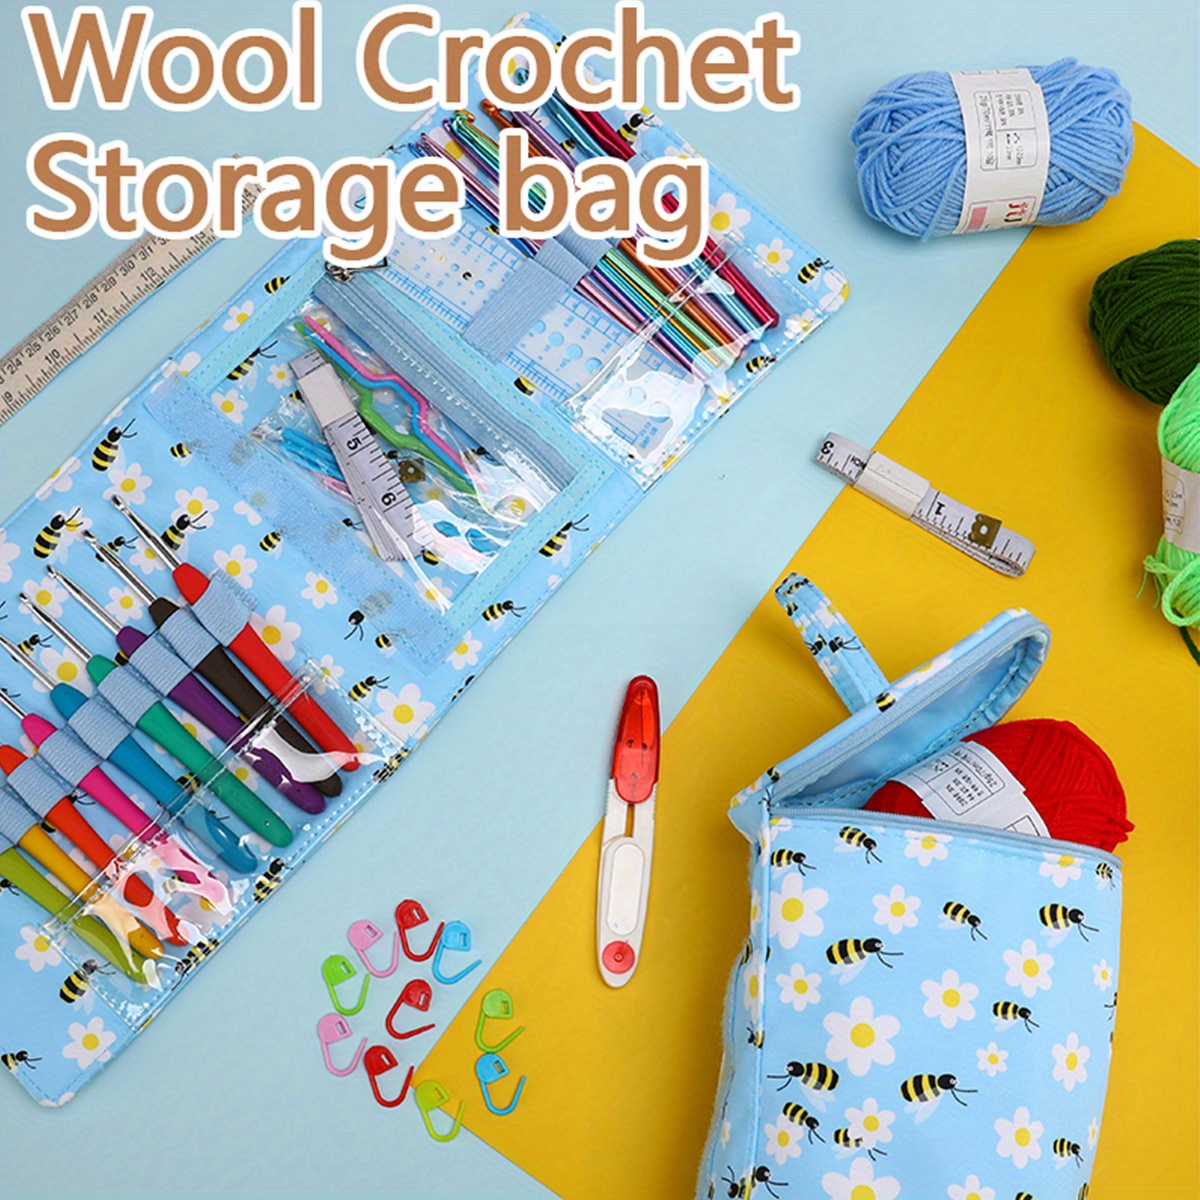 1pc Bees Printed Crochet Yarn Storage Bag Portable Blue Bucket Knitting  Bags Crochet Weaving Tool Can Be Separated, Knitting Accessories Gift For  Knit